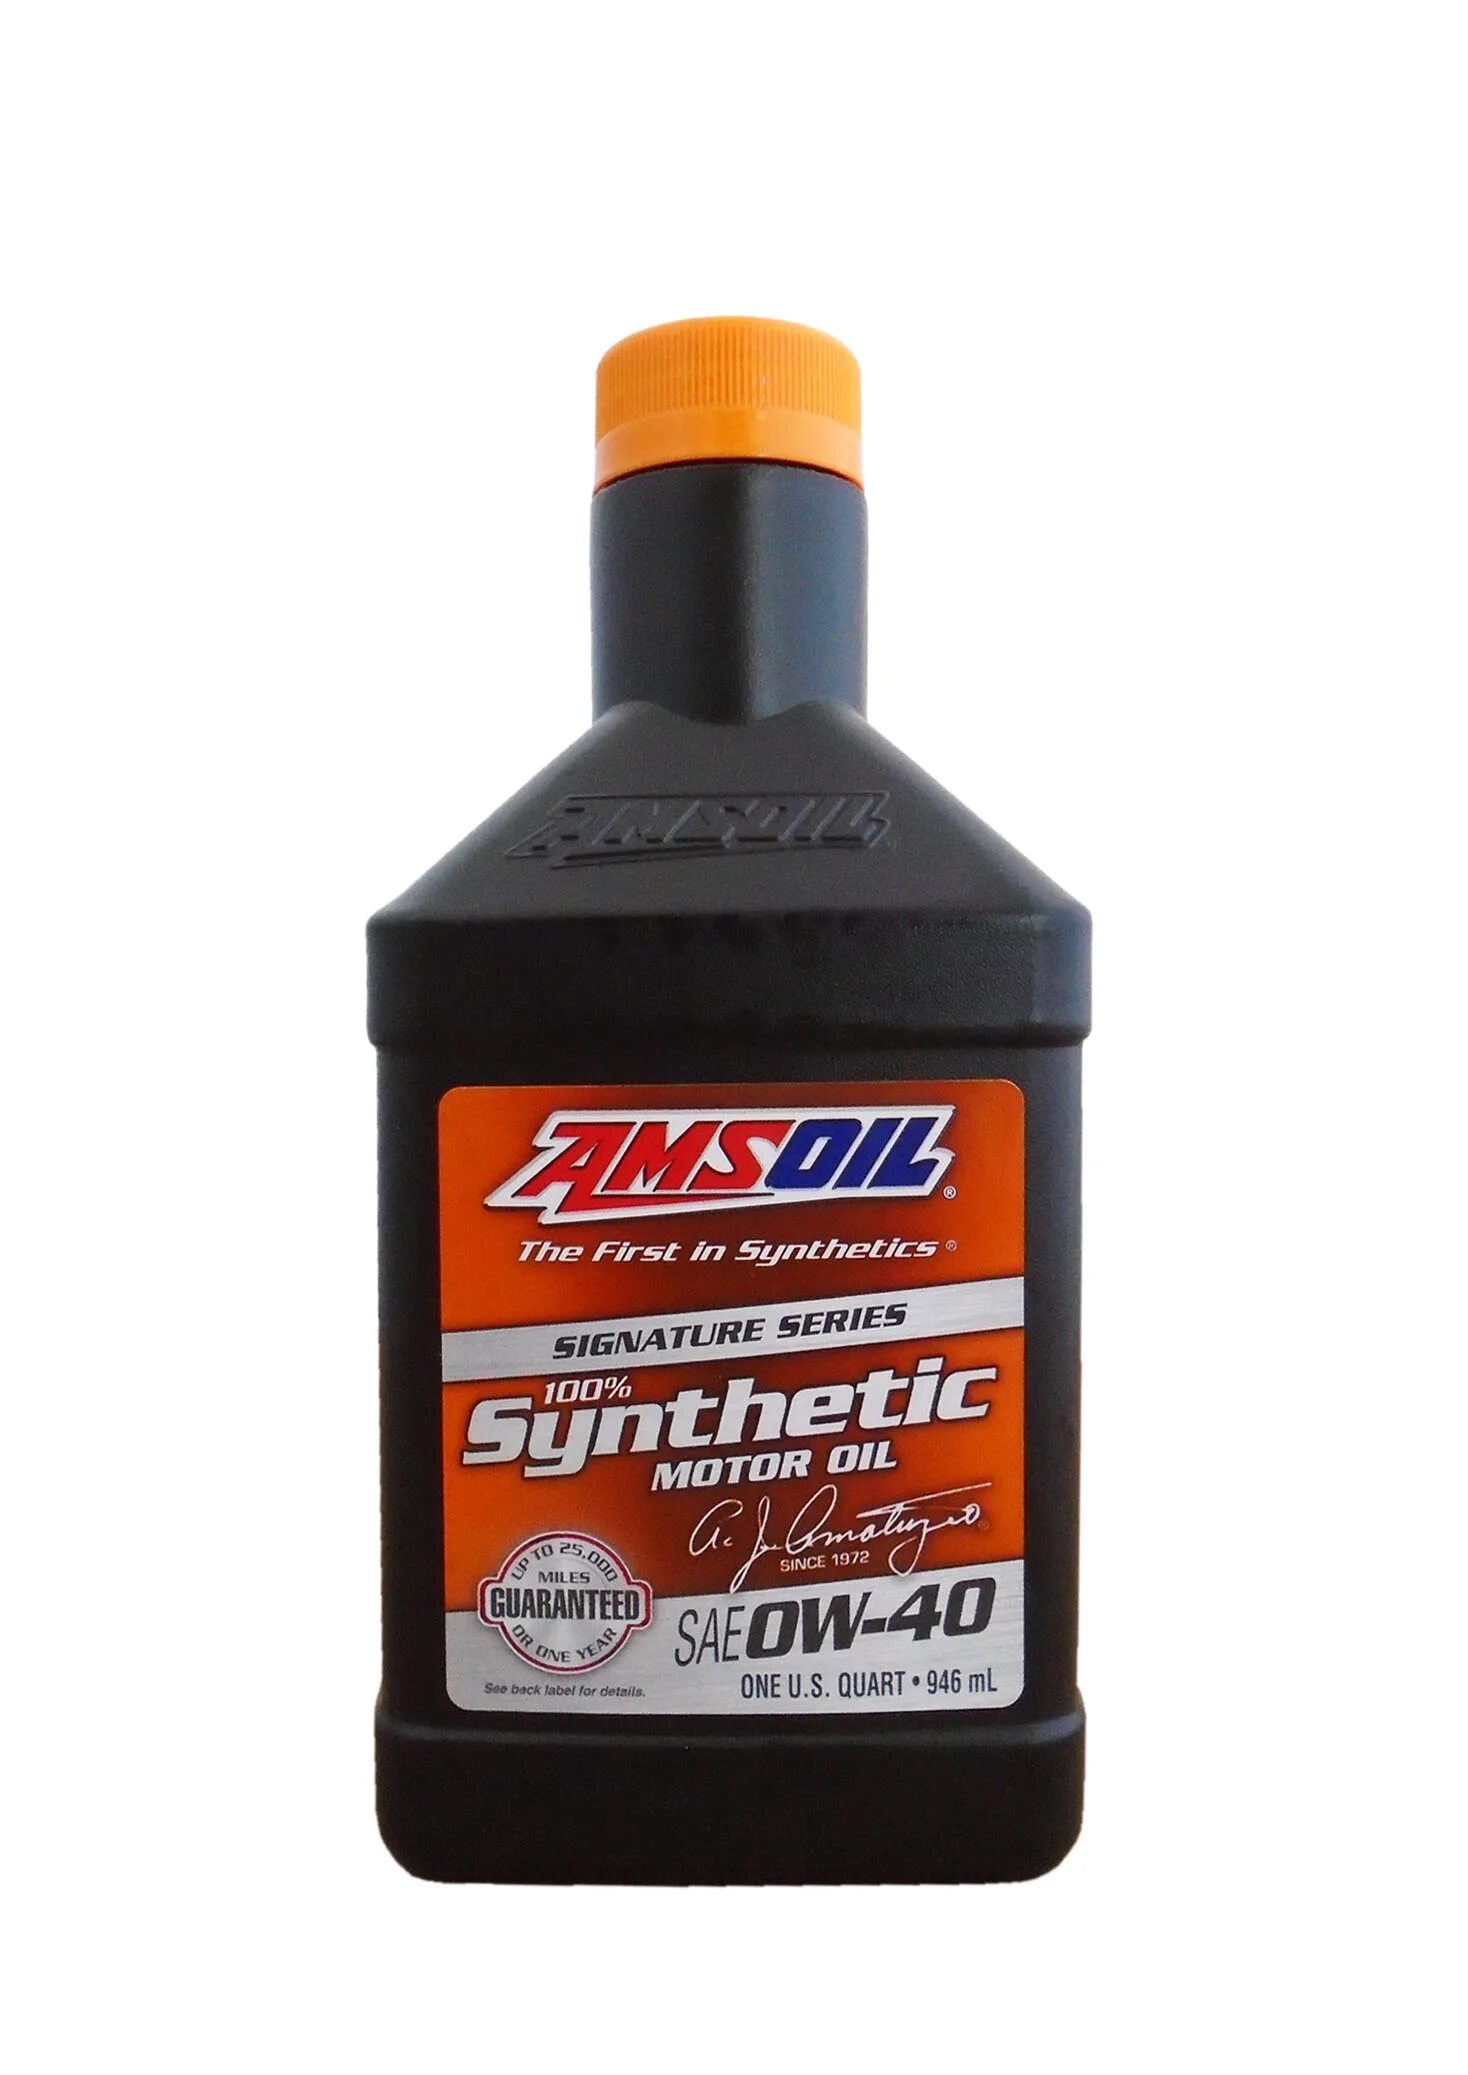 Моторное масло AMSOIL Signature Series Synthetic Motor Oil 5w-50 0.946 л. Моторное масло AMSOIL extreme Power SAE 0w-40 100% Synthetic Motor Oil (0,946л). AMSOIL 20w40 синтетическая. AMSOIL 0w40 1л. Signature series synthetic